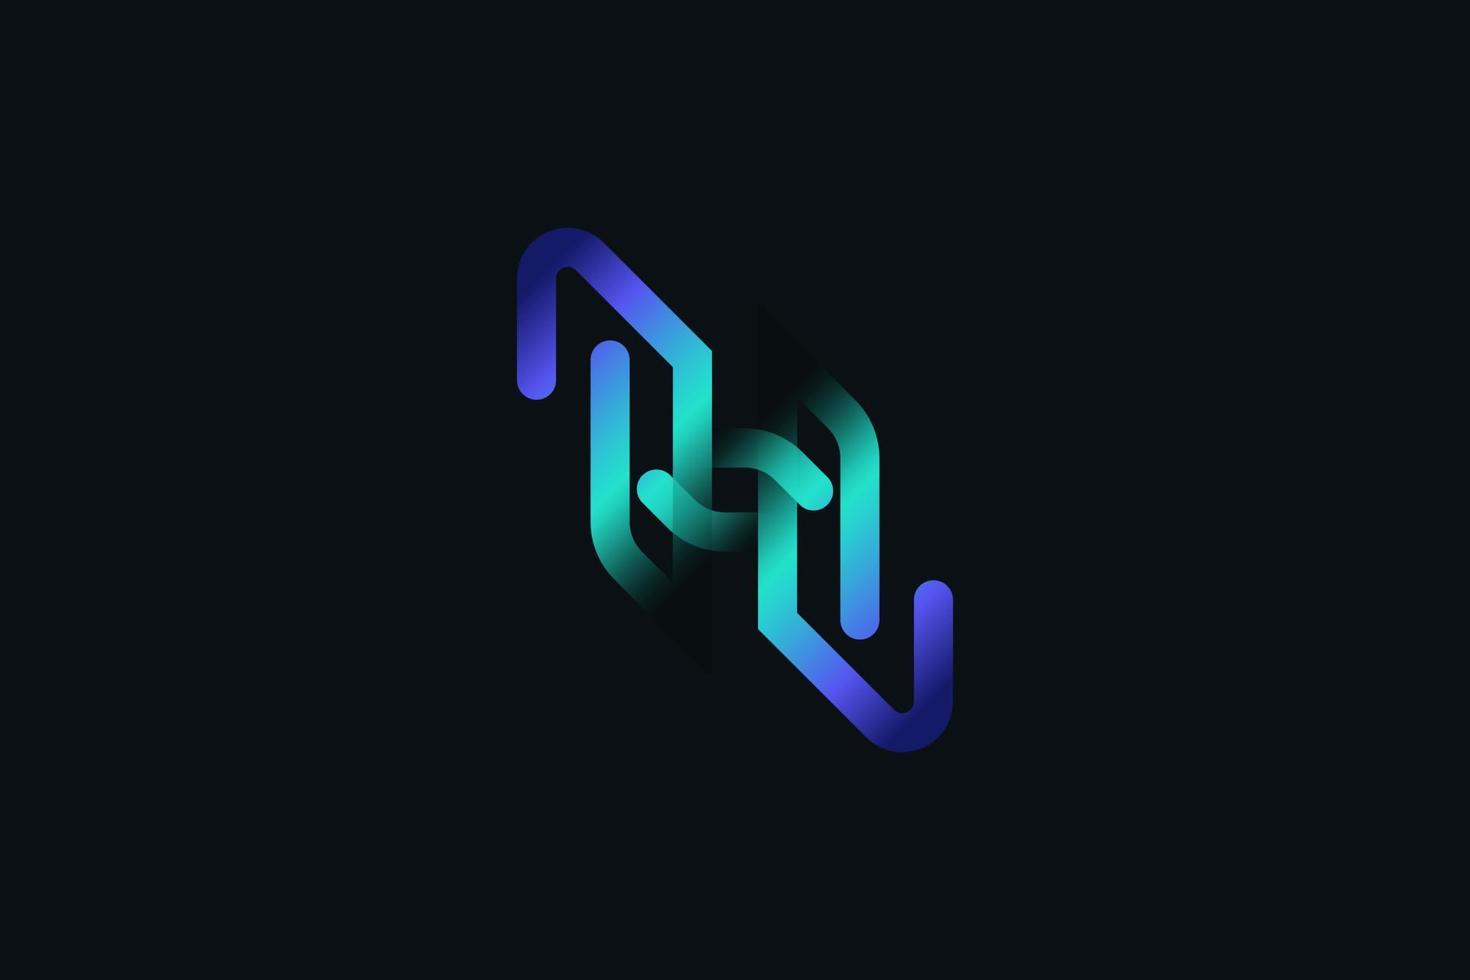 Abstract and Geometric Letter H Logo Design with Blue and Green Gradient Style. Modern Creative Logo, Suitable for Business and Technology Brand Identity vector